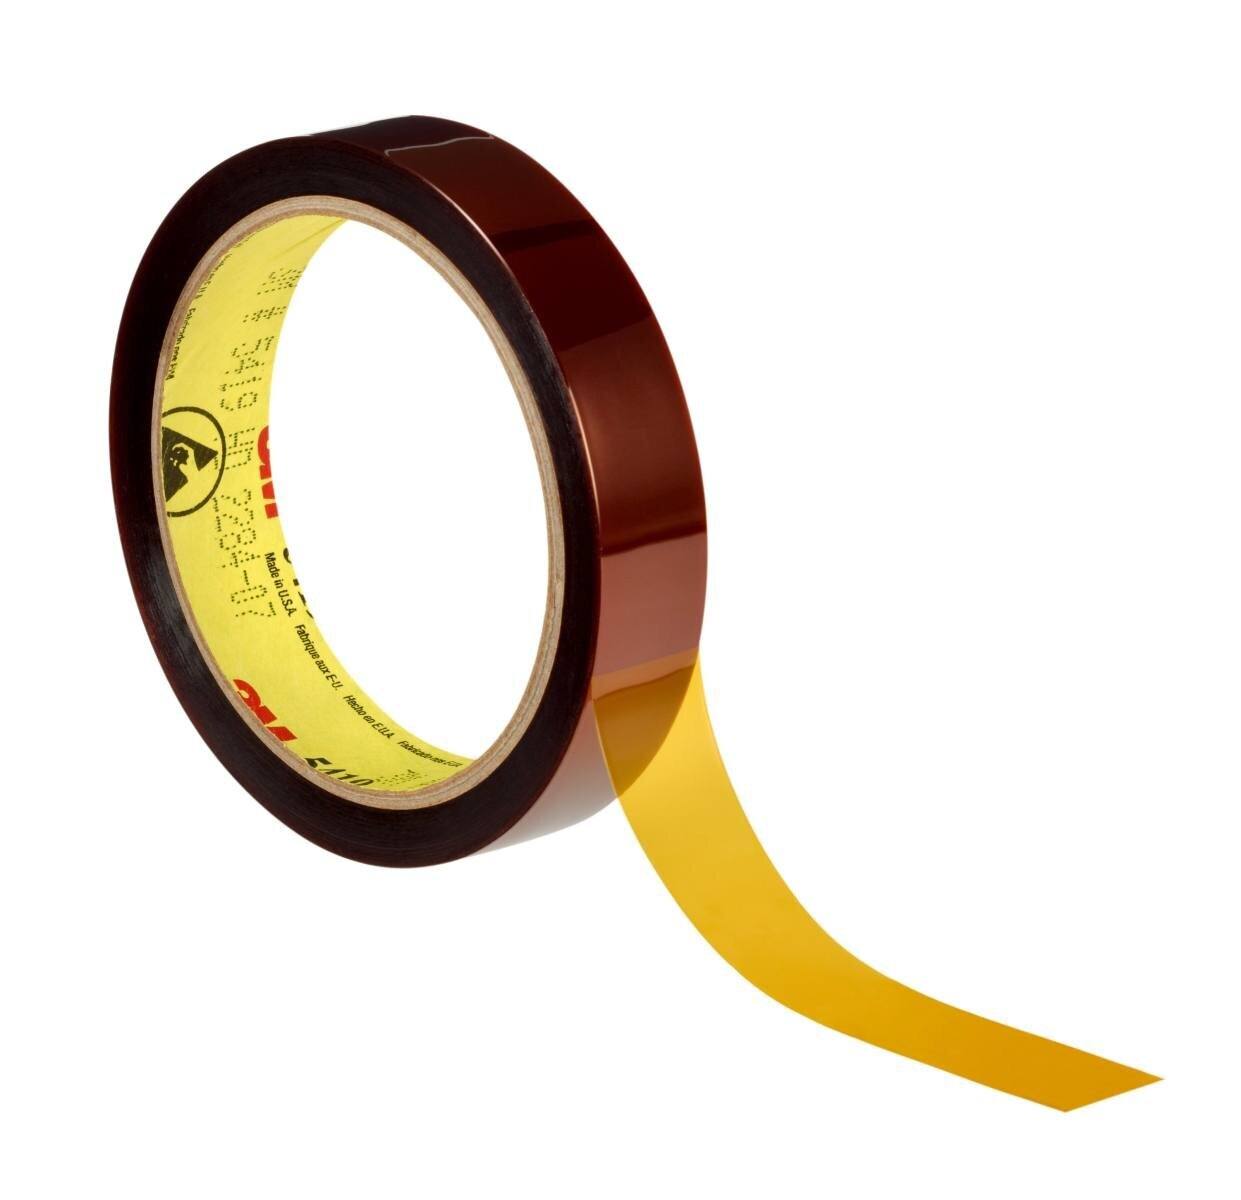 3M high temperature polyimide adhesive tape 5419, brown, 12.7 mm x 33 m, 68.58 µm